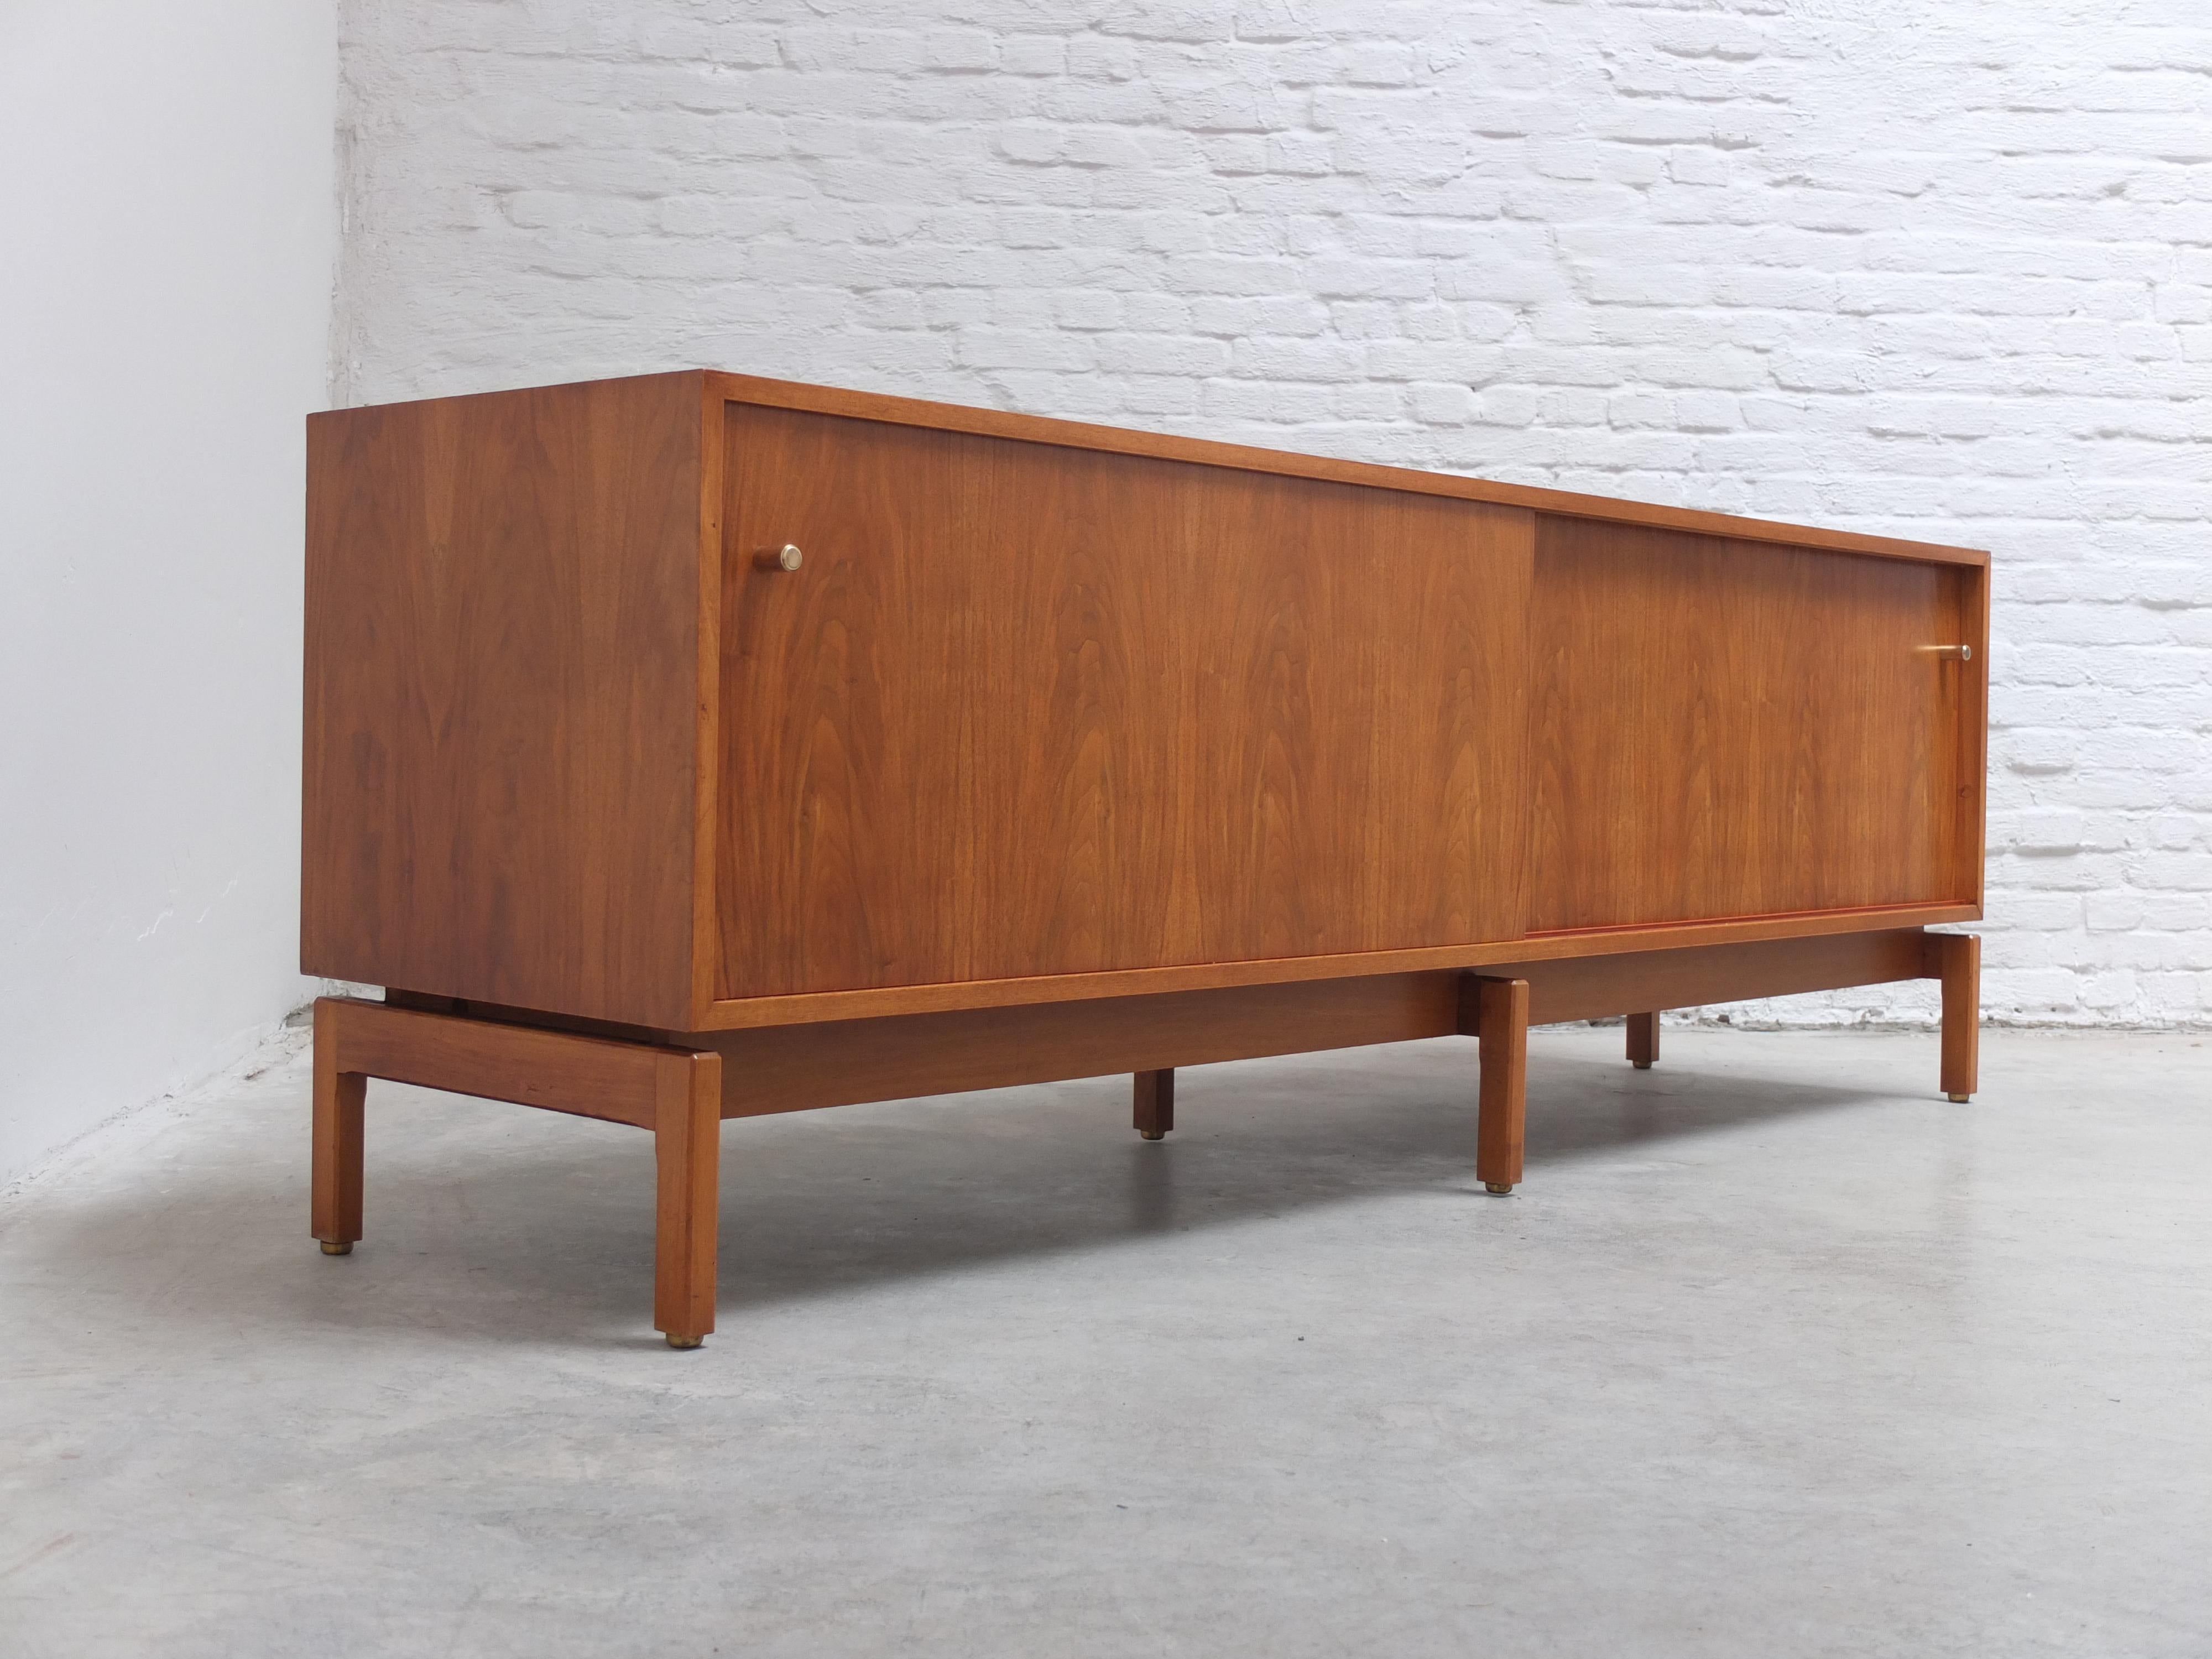 20th Century Rare 'Abstracta' Lowboard by Jos De Mey for Van Den Berghe-Pauvers, 1960s For Sale